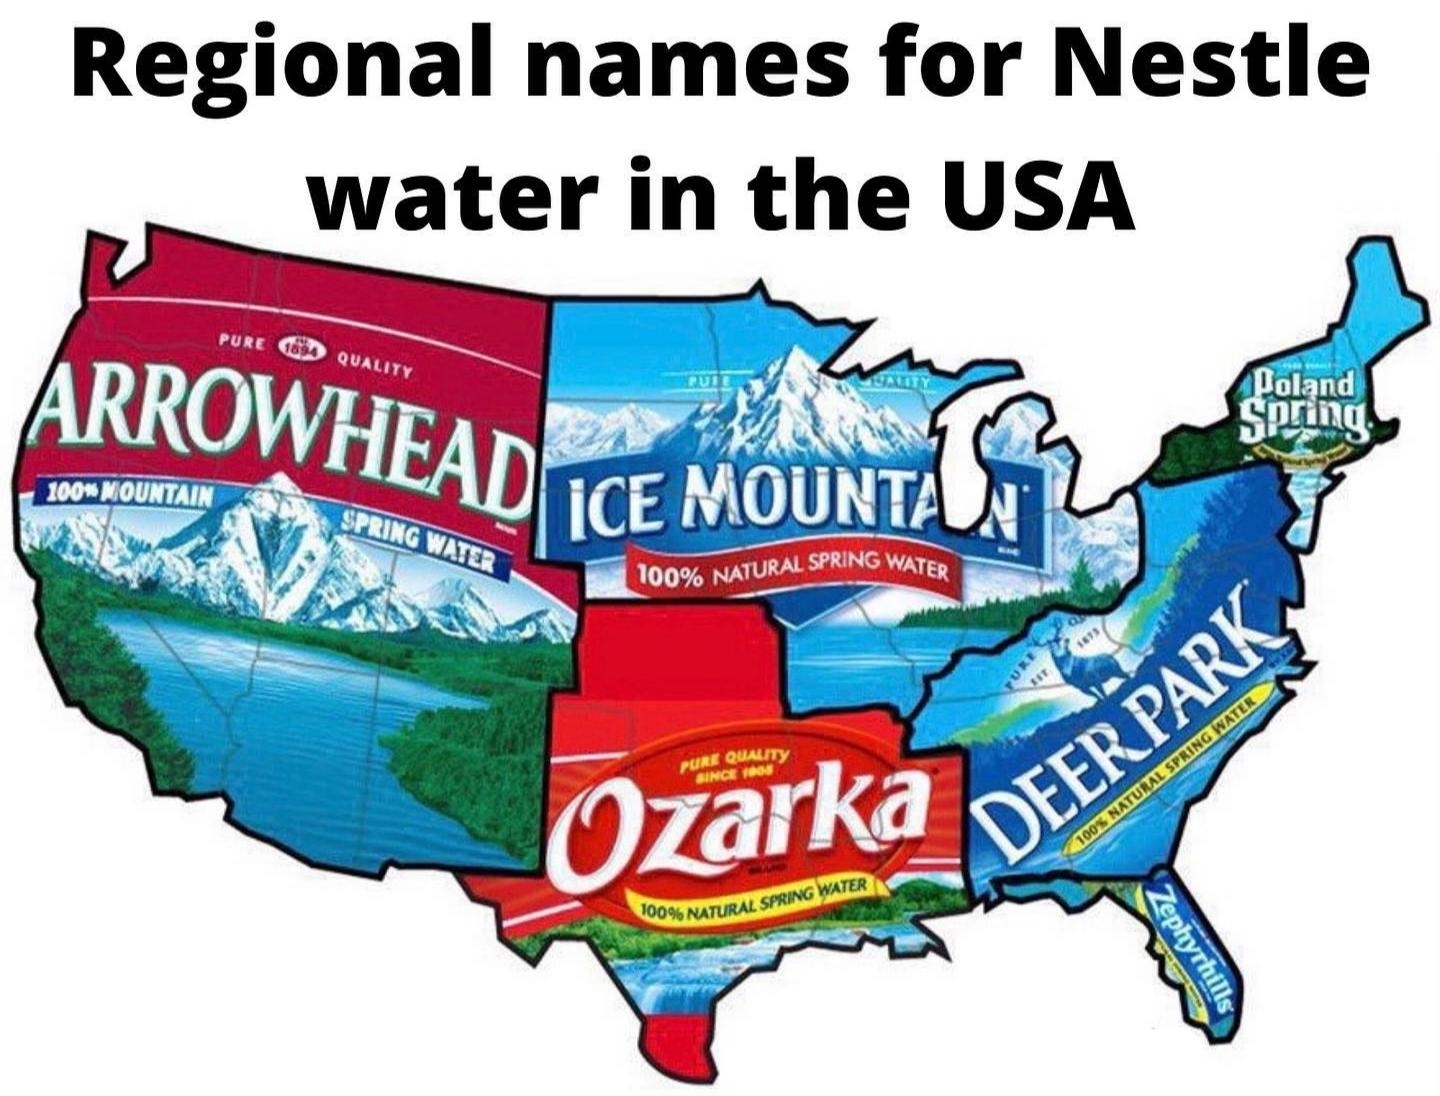 a map of the US showing  arrowhead on the west coast, ozarka in the south, ice mountain in the midwest, deer park in the southeast, and poland sprin gin the northeast